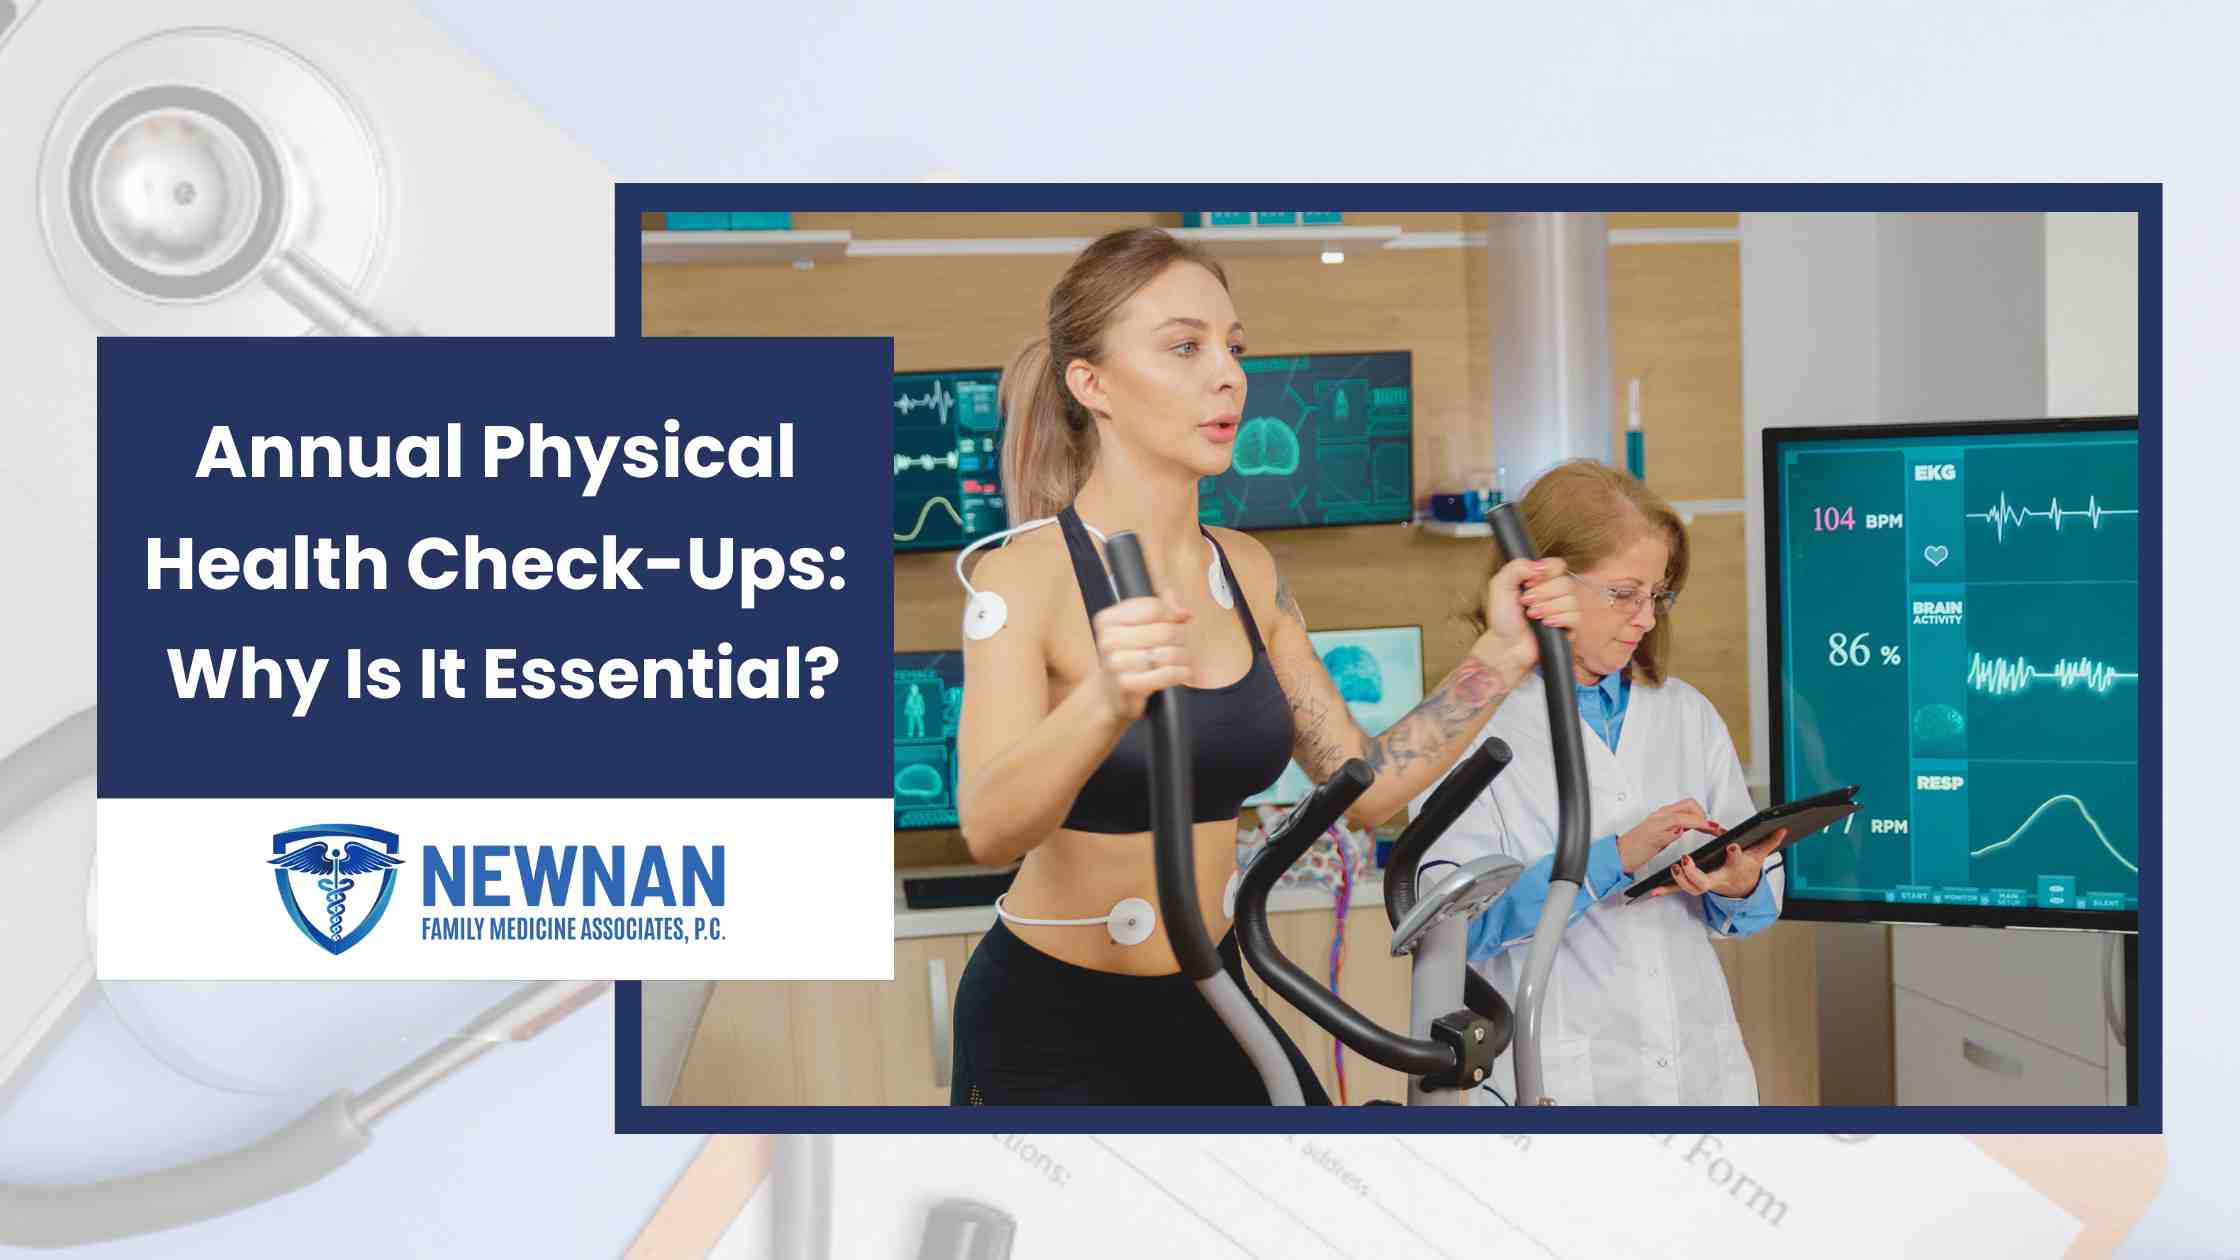 Annual Physical Health Check-Ups: Why Is It Essential?